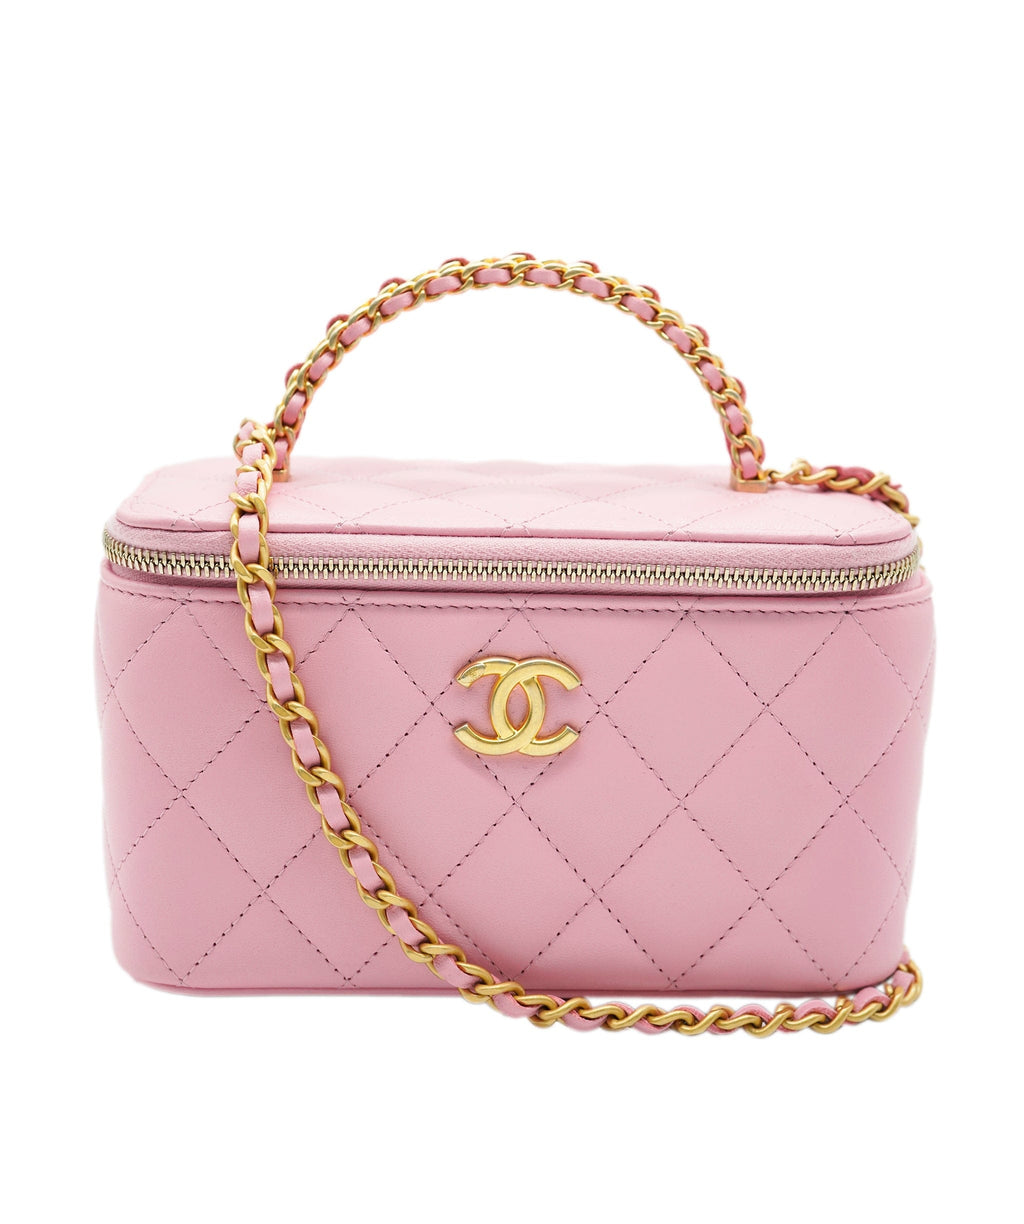 Chanel leather small cosmetic box Vanity case purple bag rose  Girly bags  Purple bags Bags